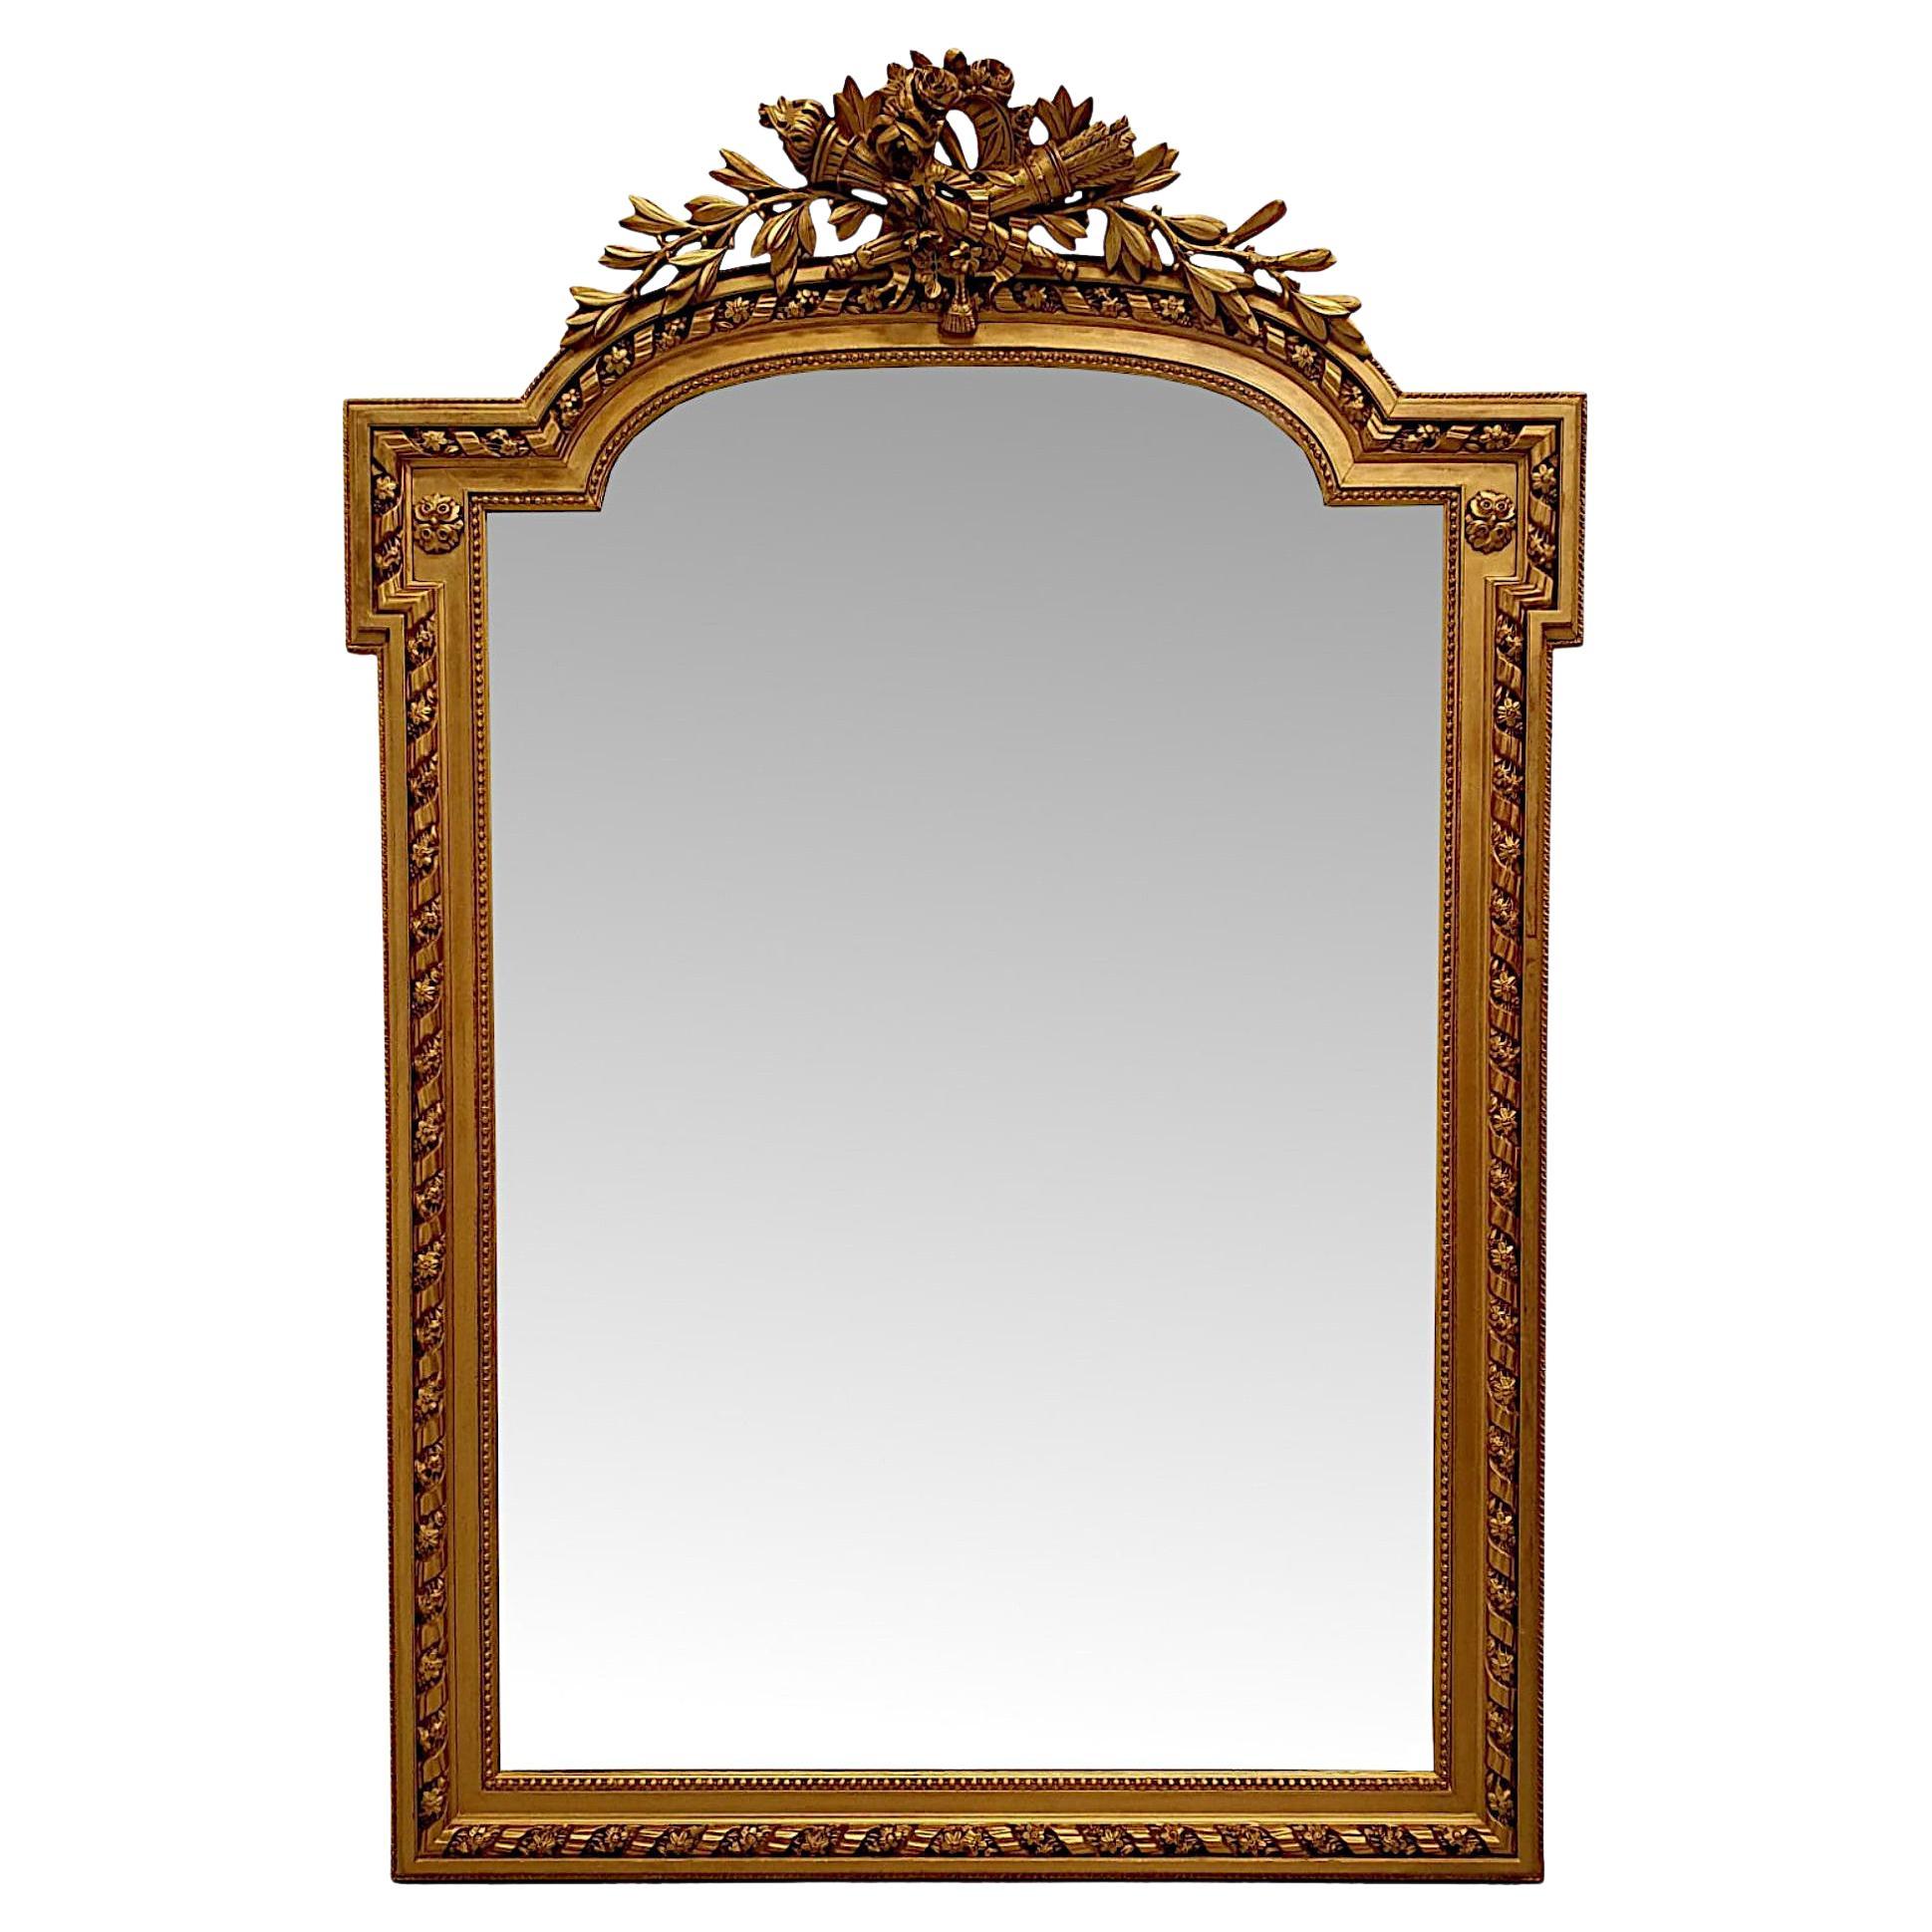  A Gorgeous 19th Century Gilt Finish Hall or Overmantle Mirror For Sale